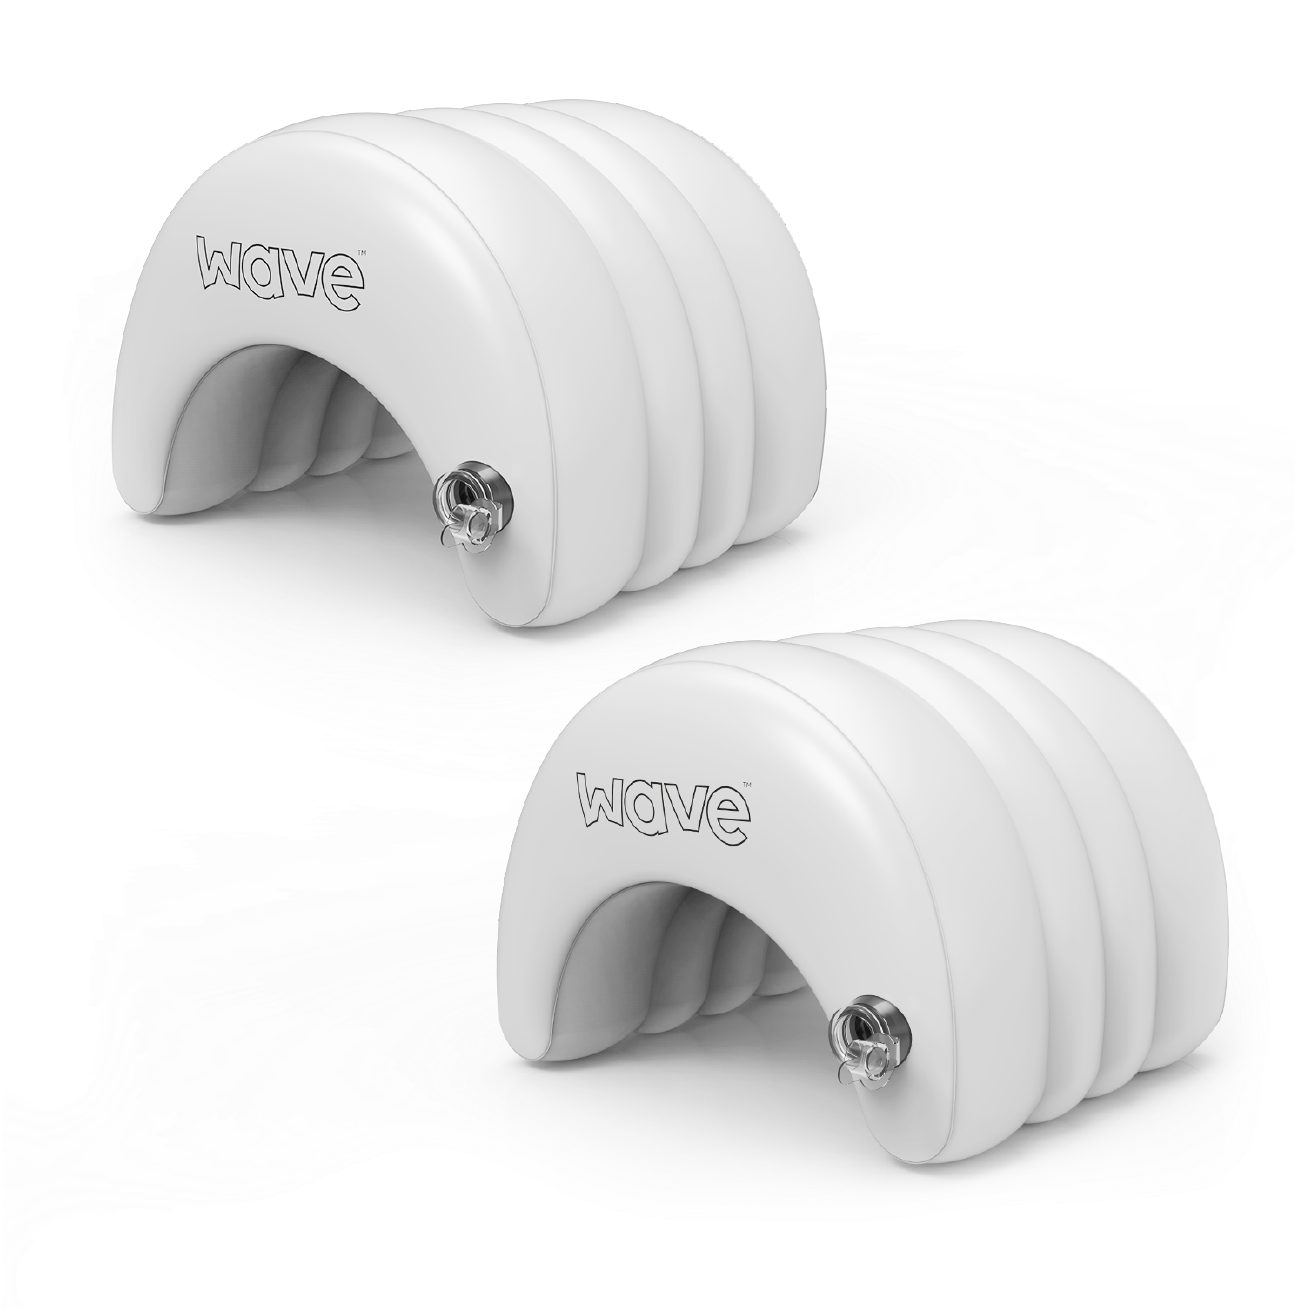 Wave Spa Inflatable Head Rest Pillow, White - 2 pack - Wave Spas Inflatable, foam Hot Tubs